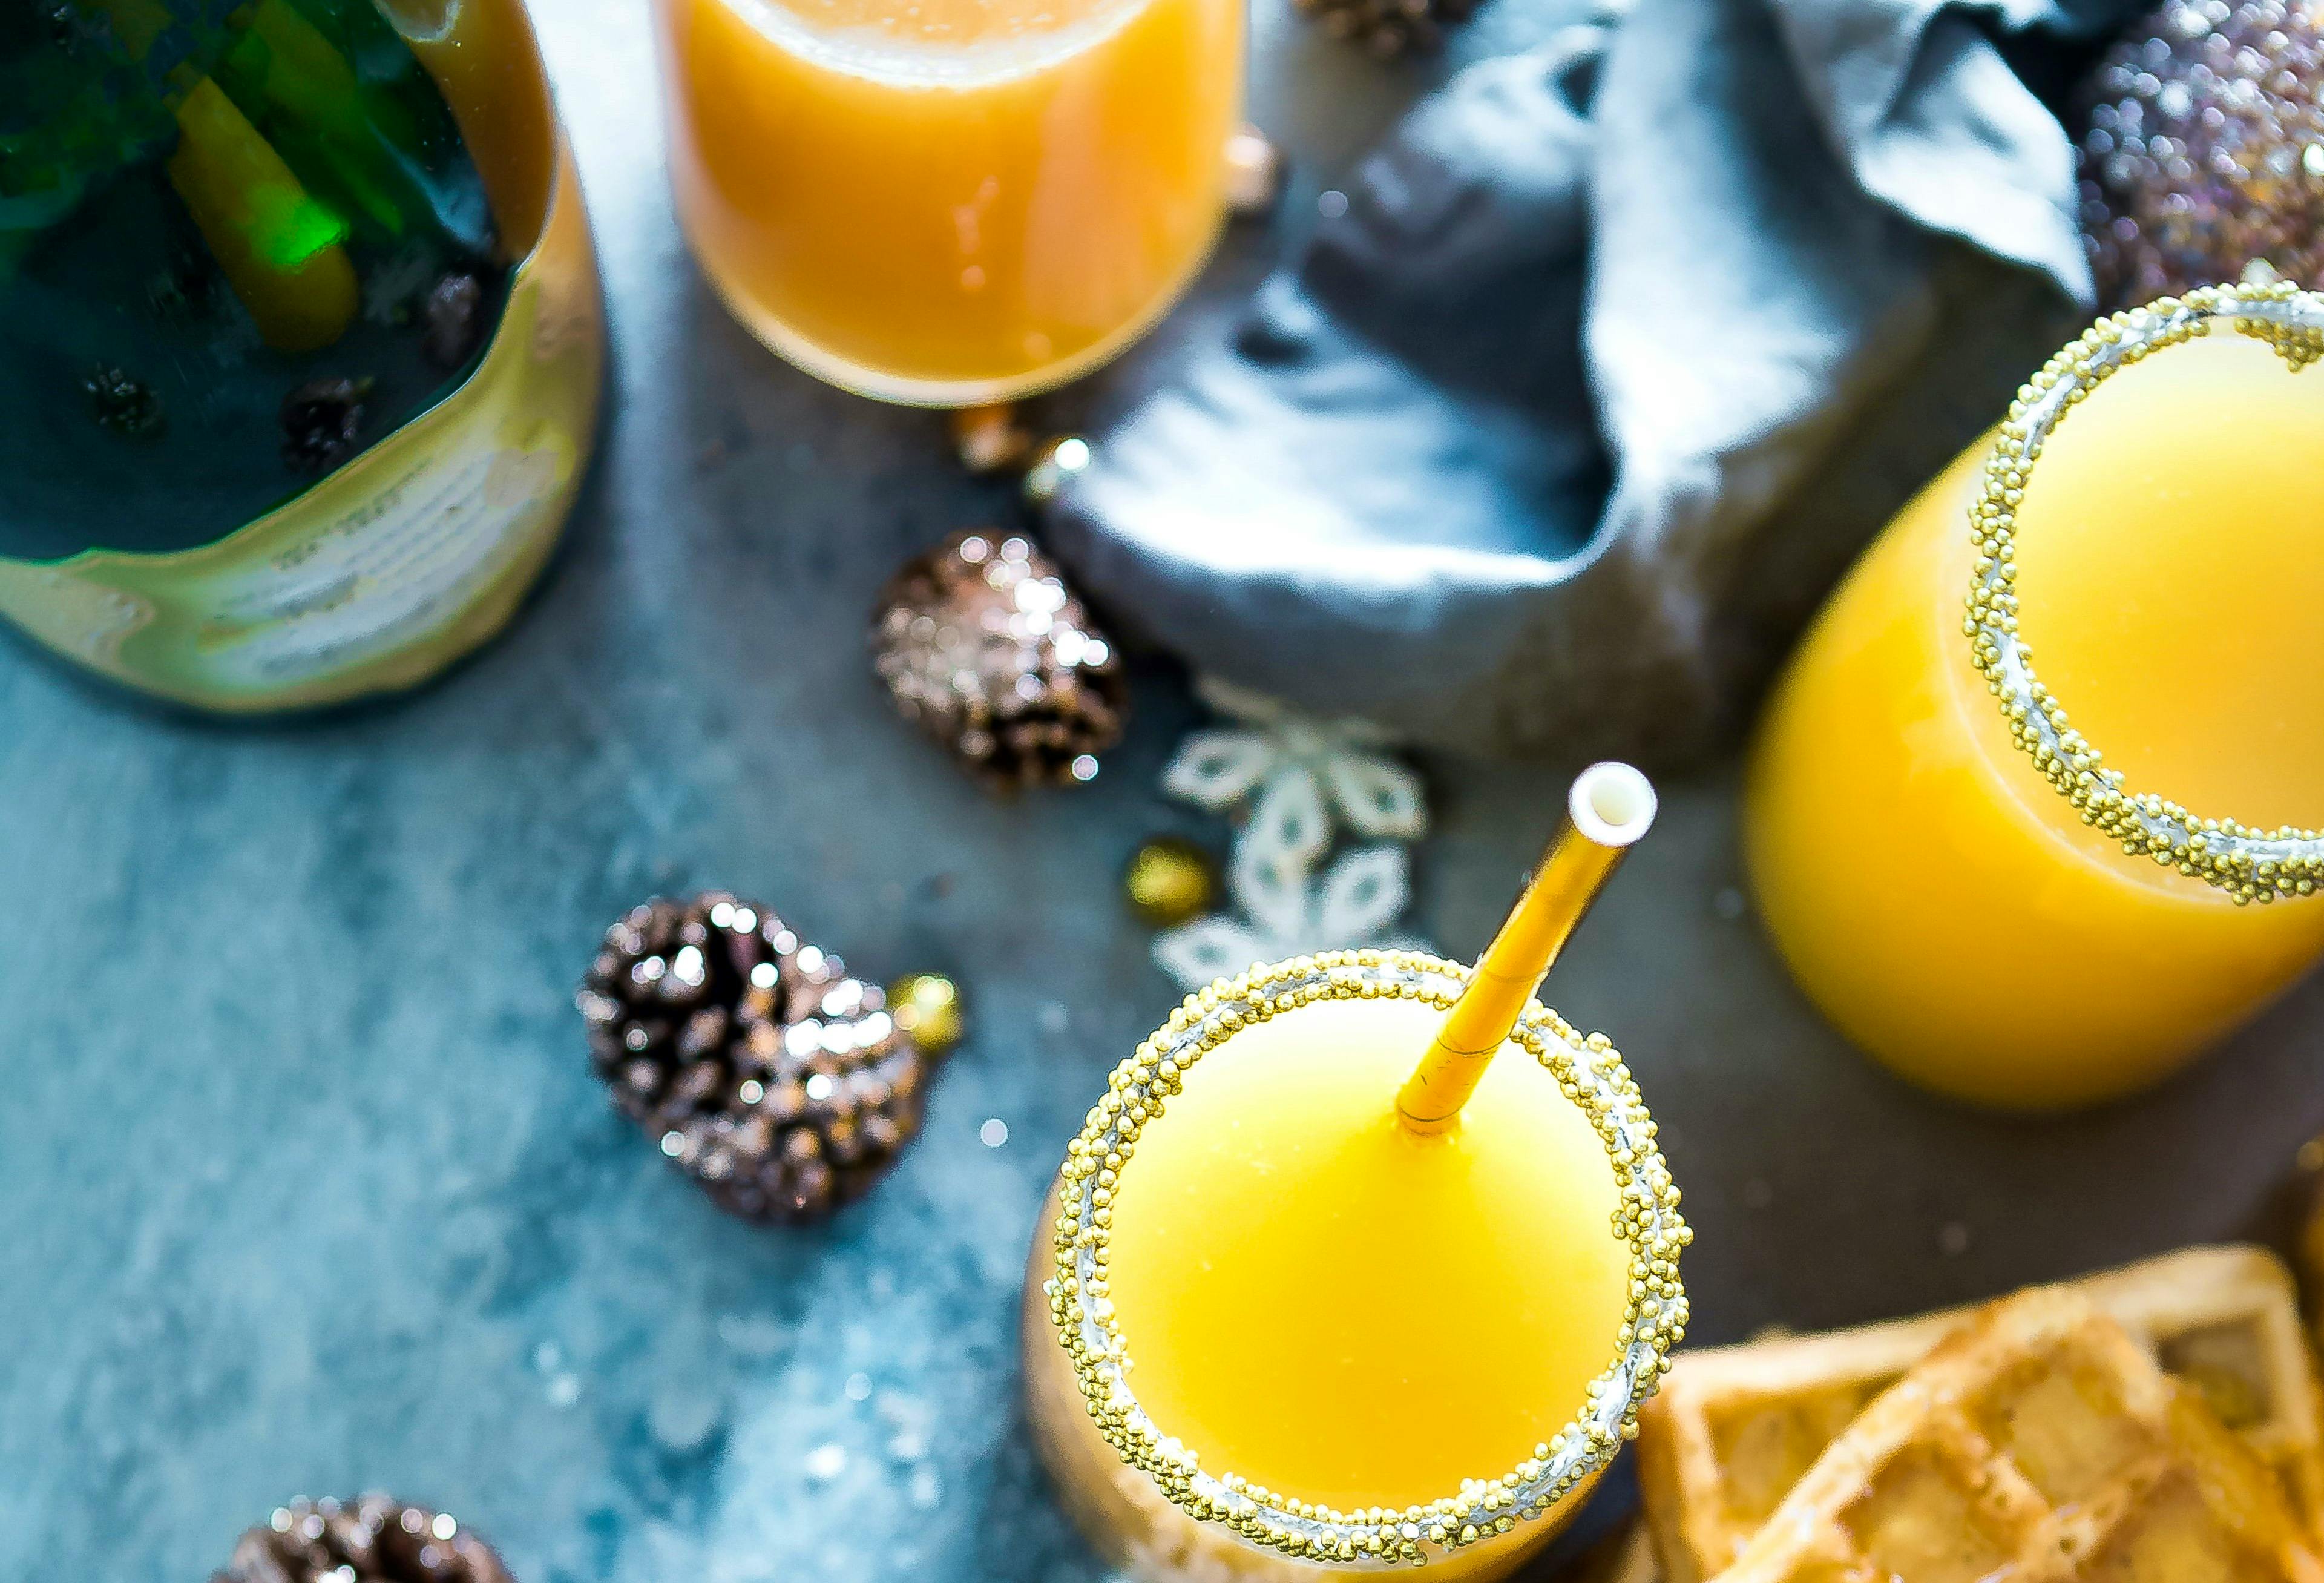 Mimosas are a classic holiday cocktail featuring orange juice and sparkling wine.